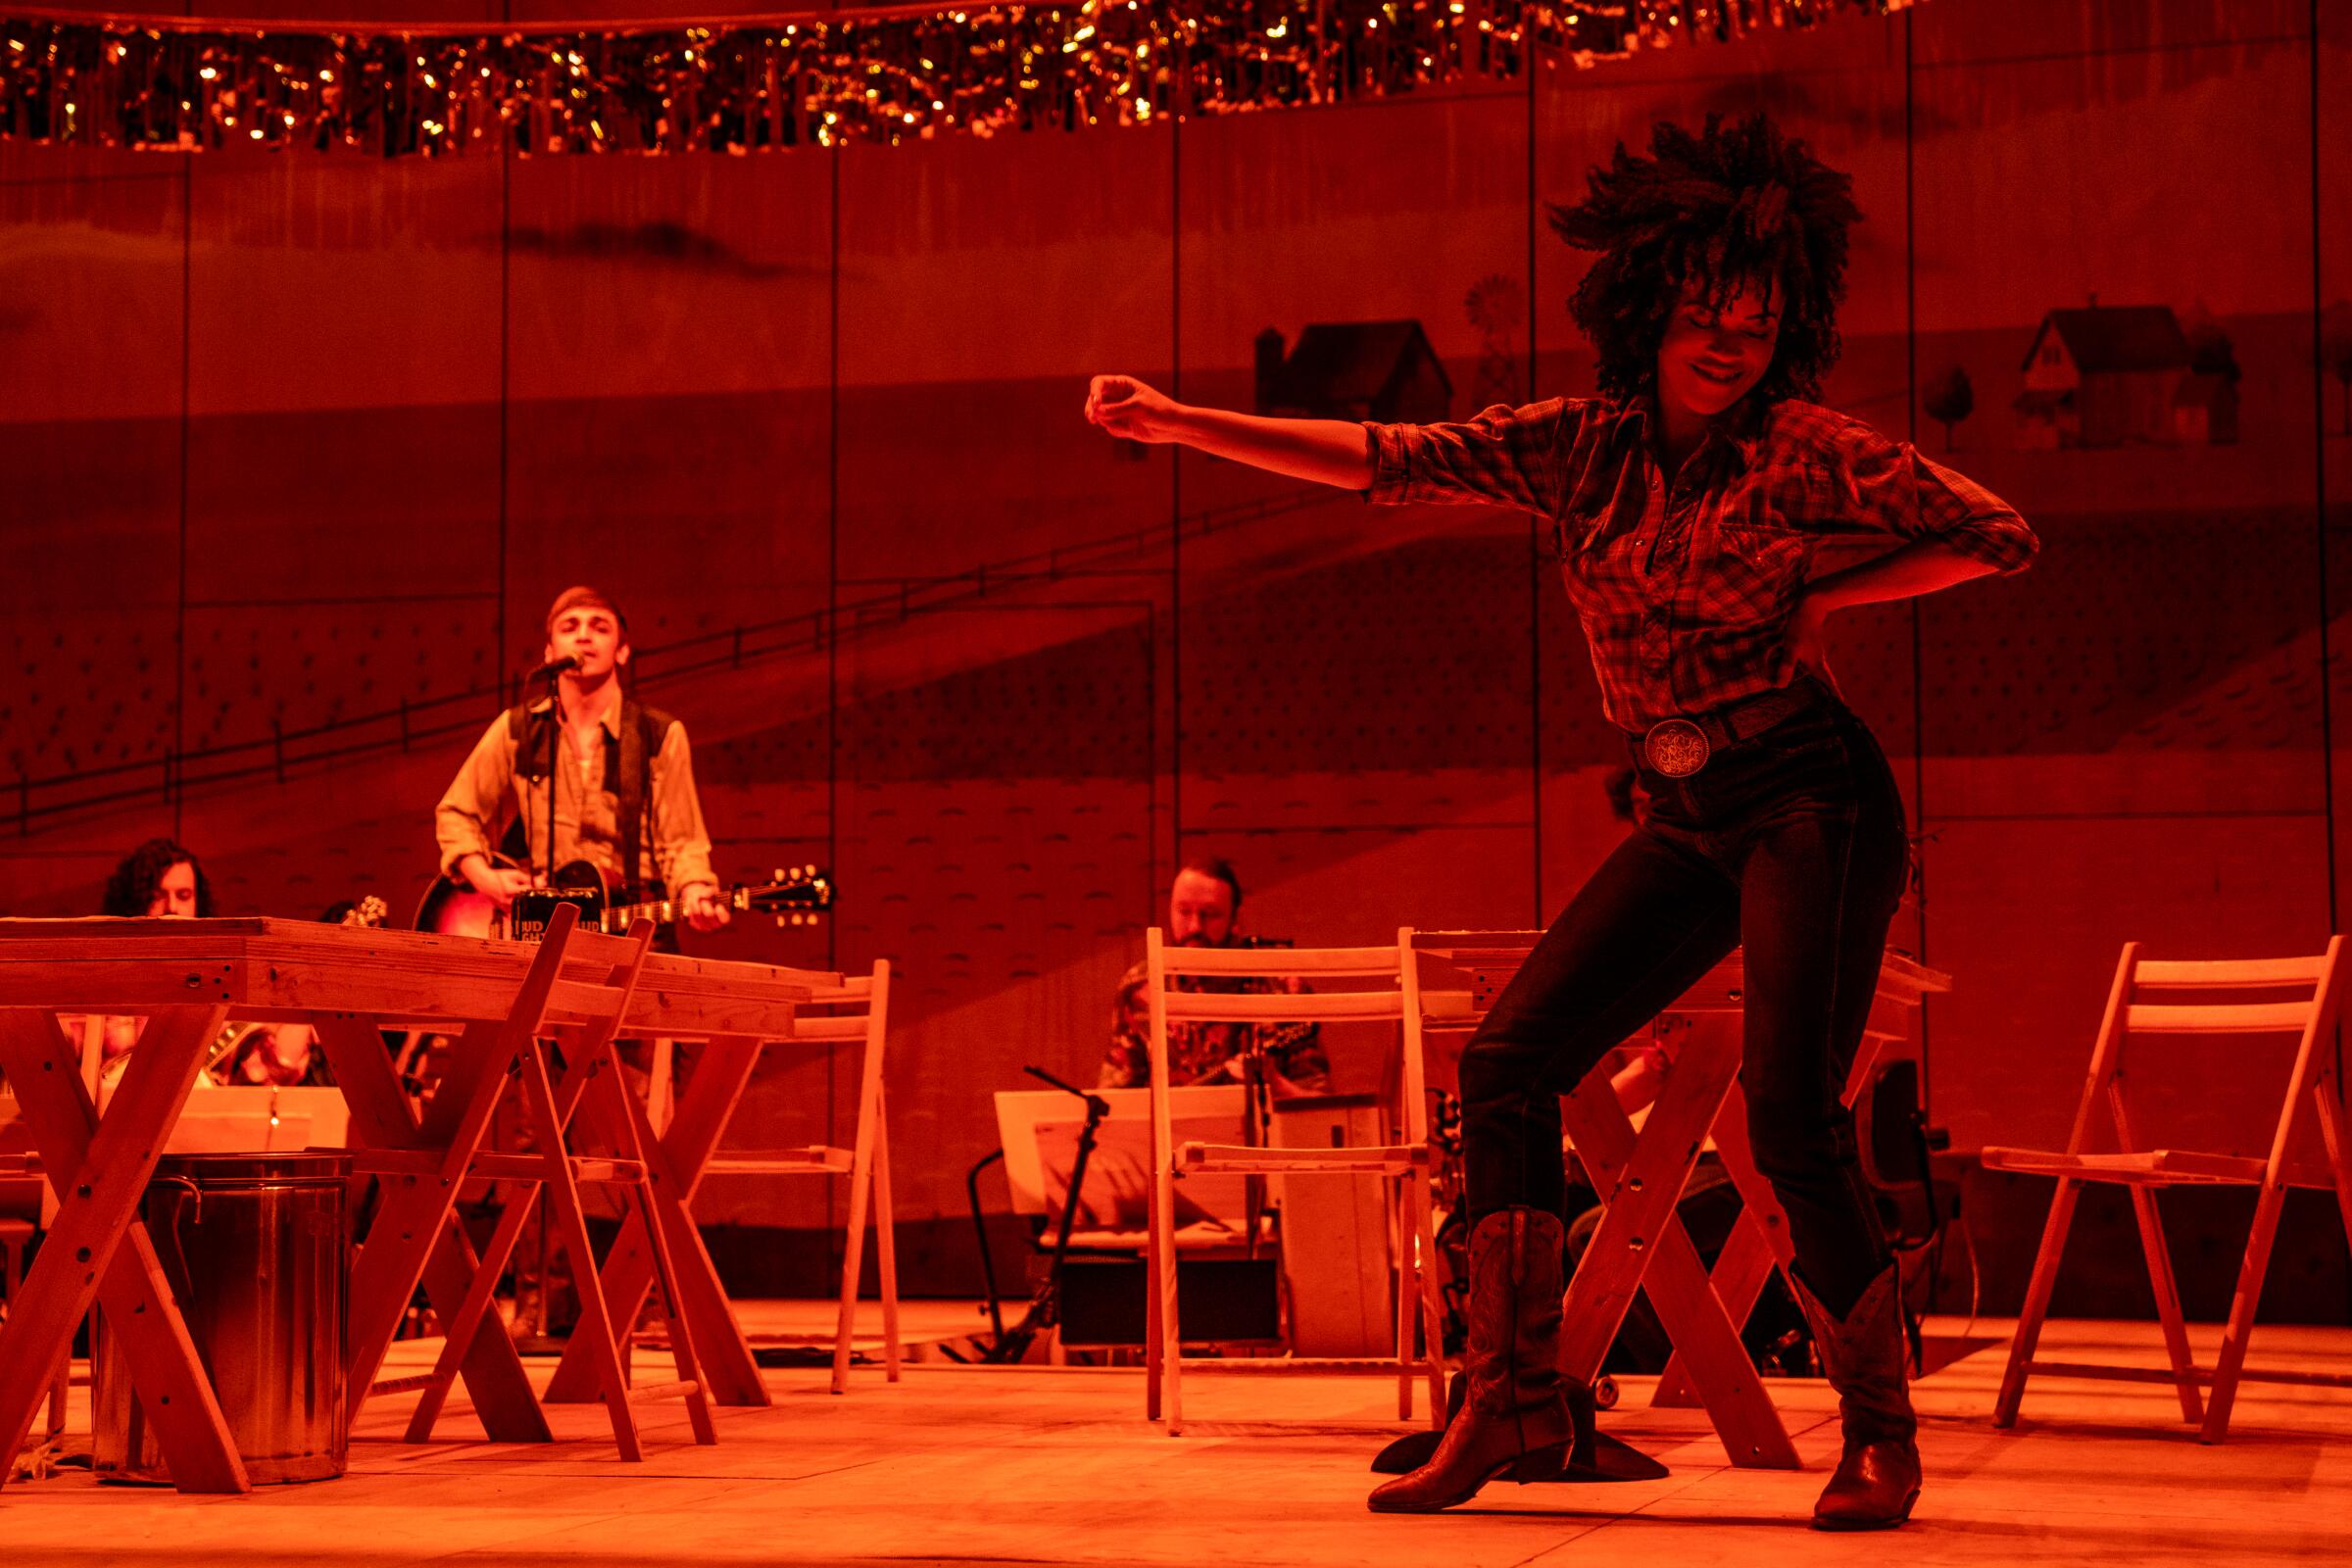 A woman dances on a stage that glows red.